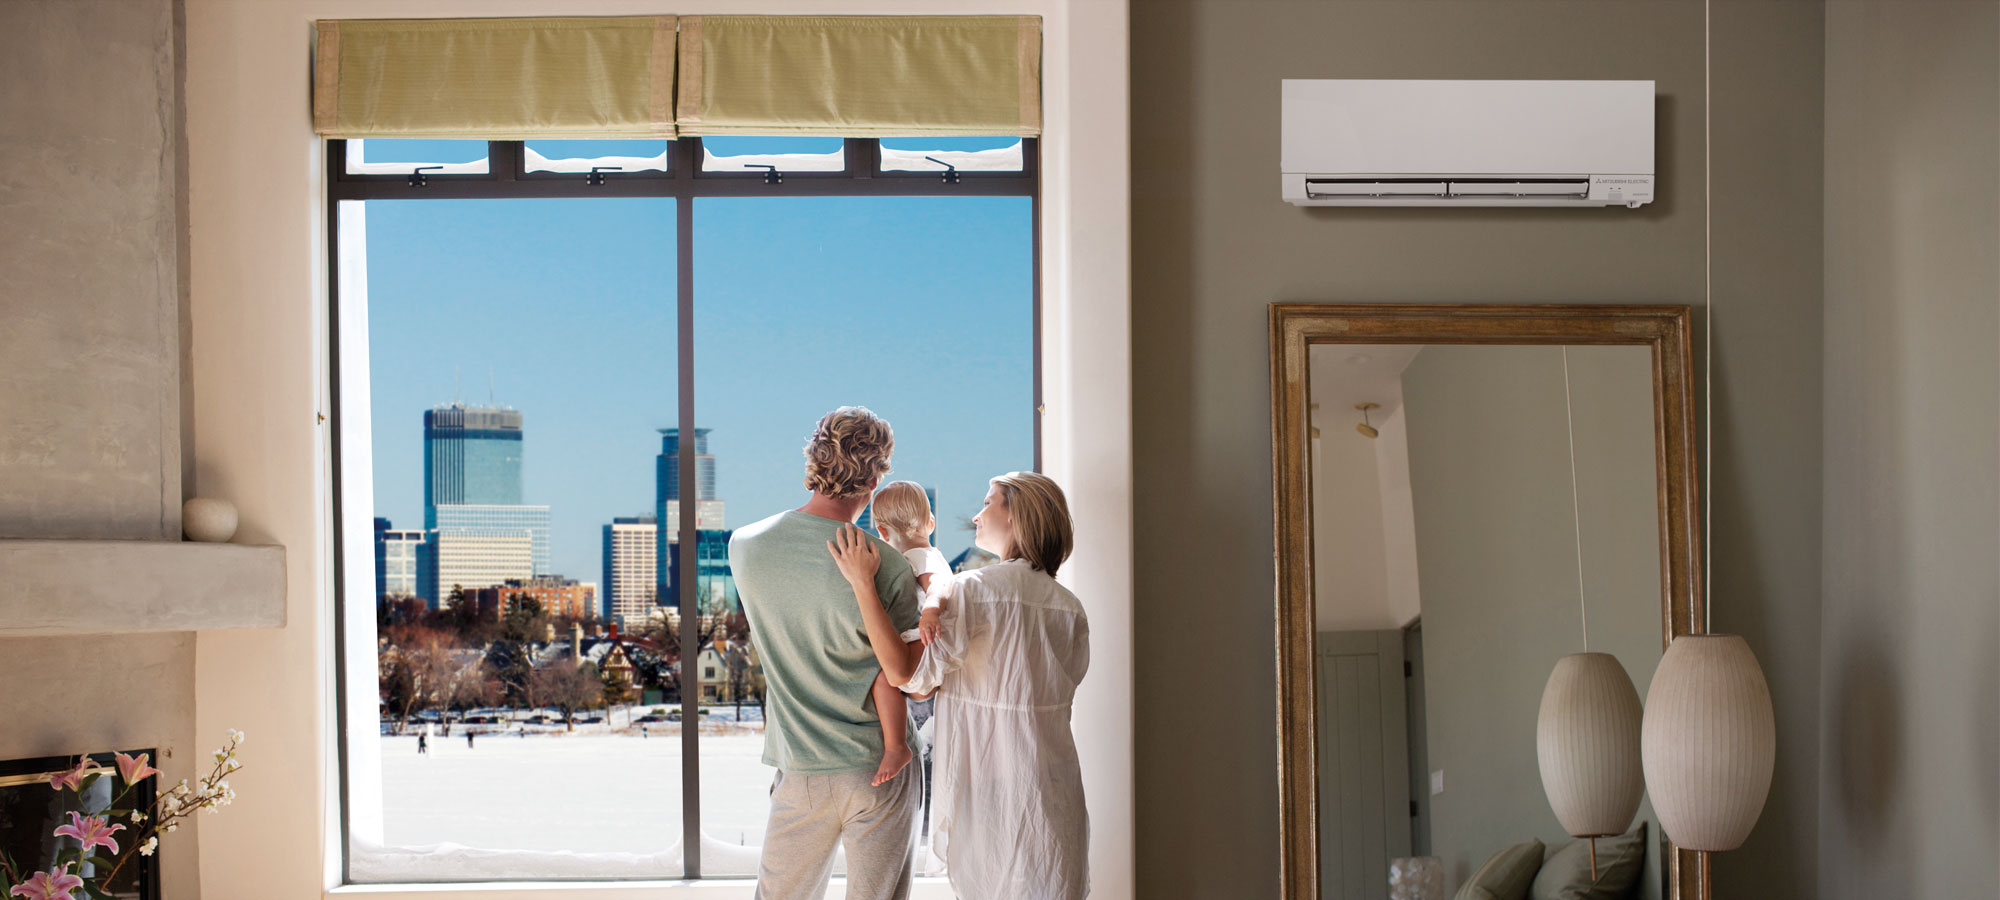 ductless heating and cooling Minneapolis